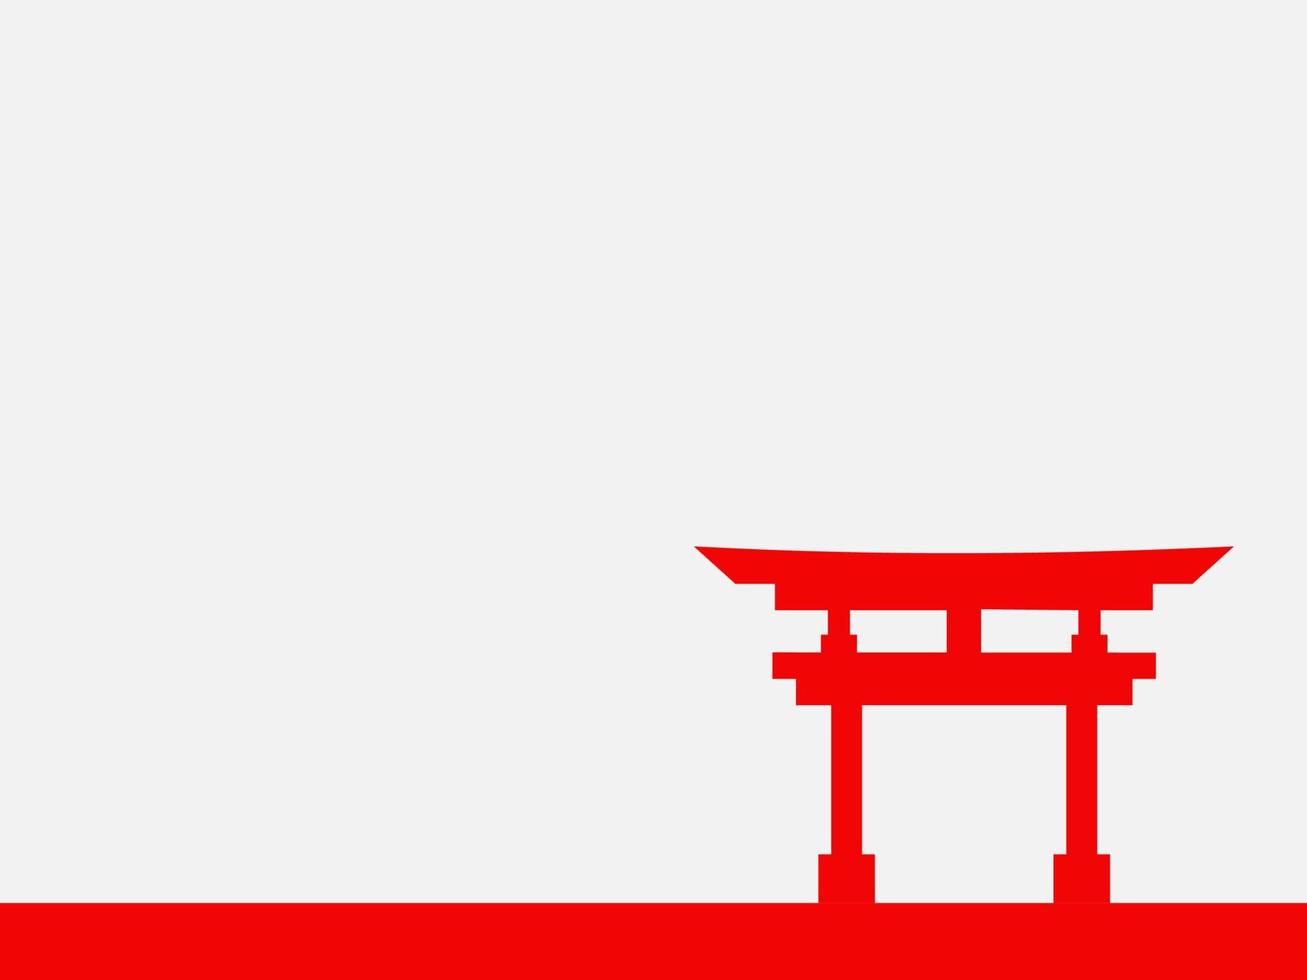 Japanese Culture Day Background or Greeting Card Design. Illustration of a Japanese gate on a white background, and a copy space area. Suitable placed on content with that theme. vector